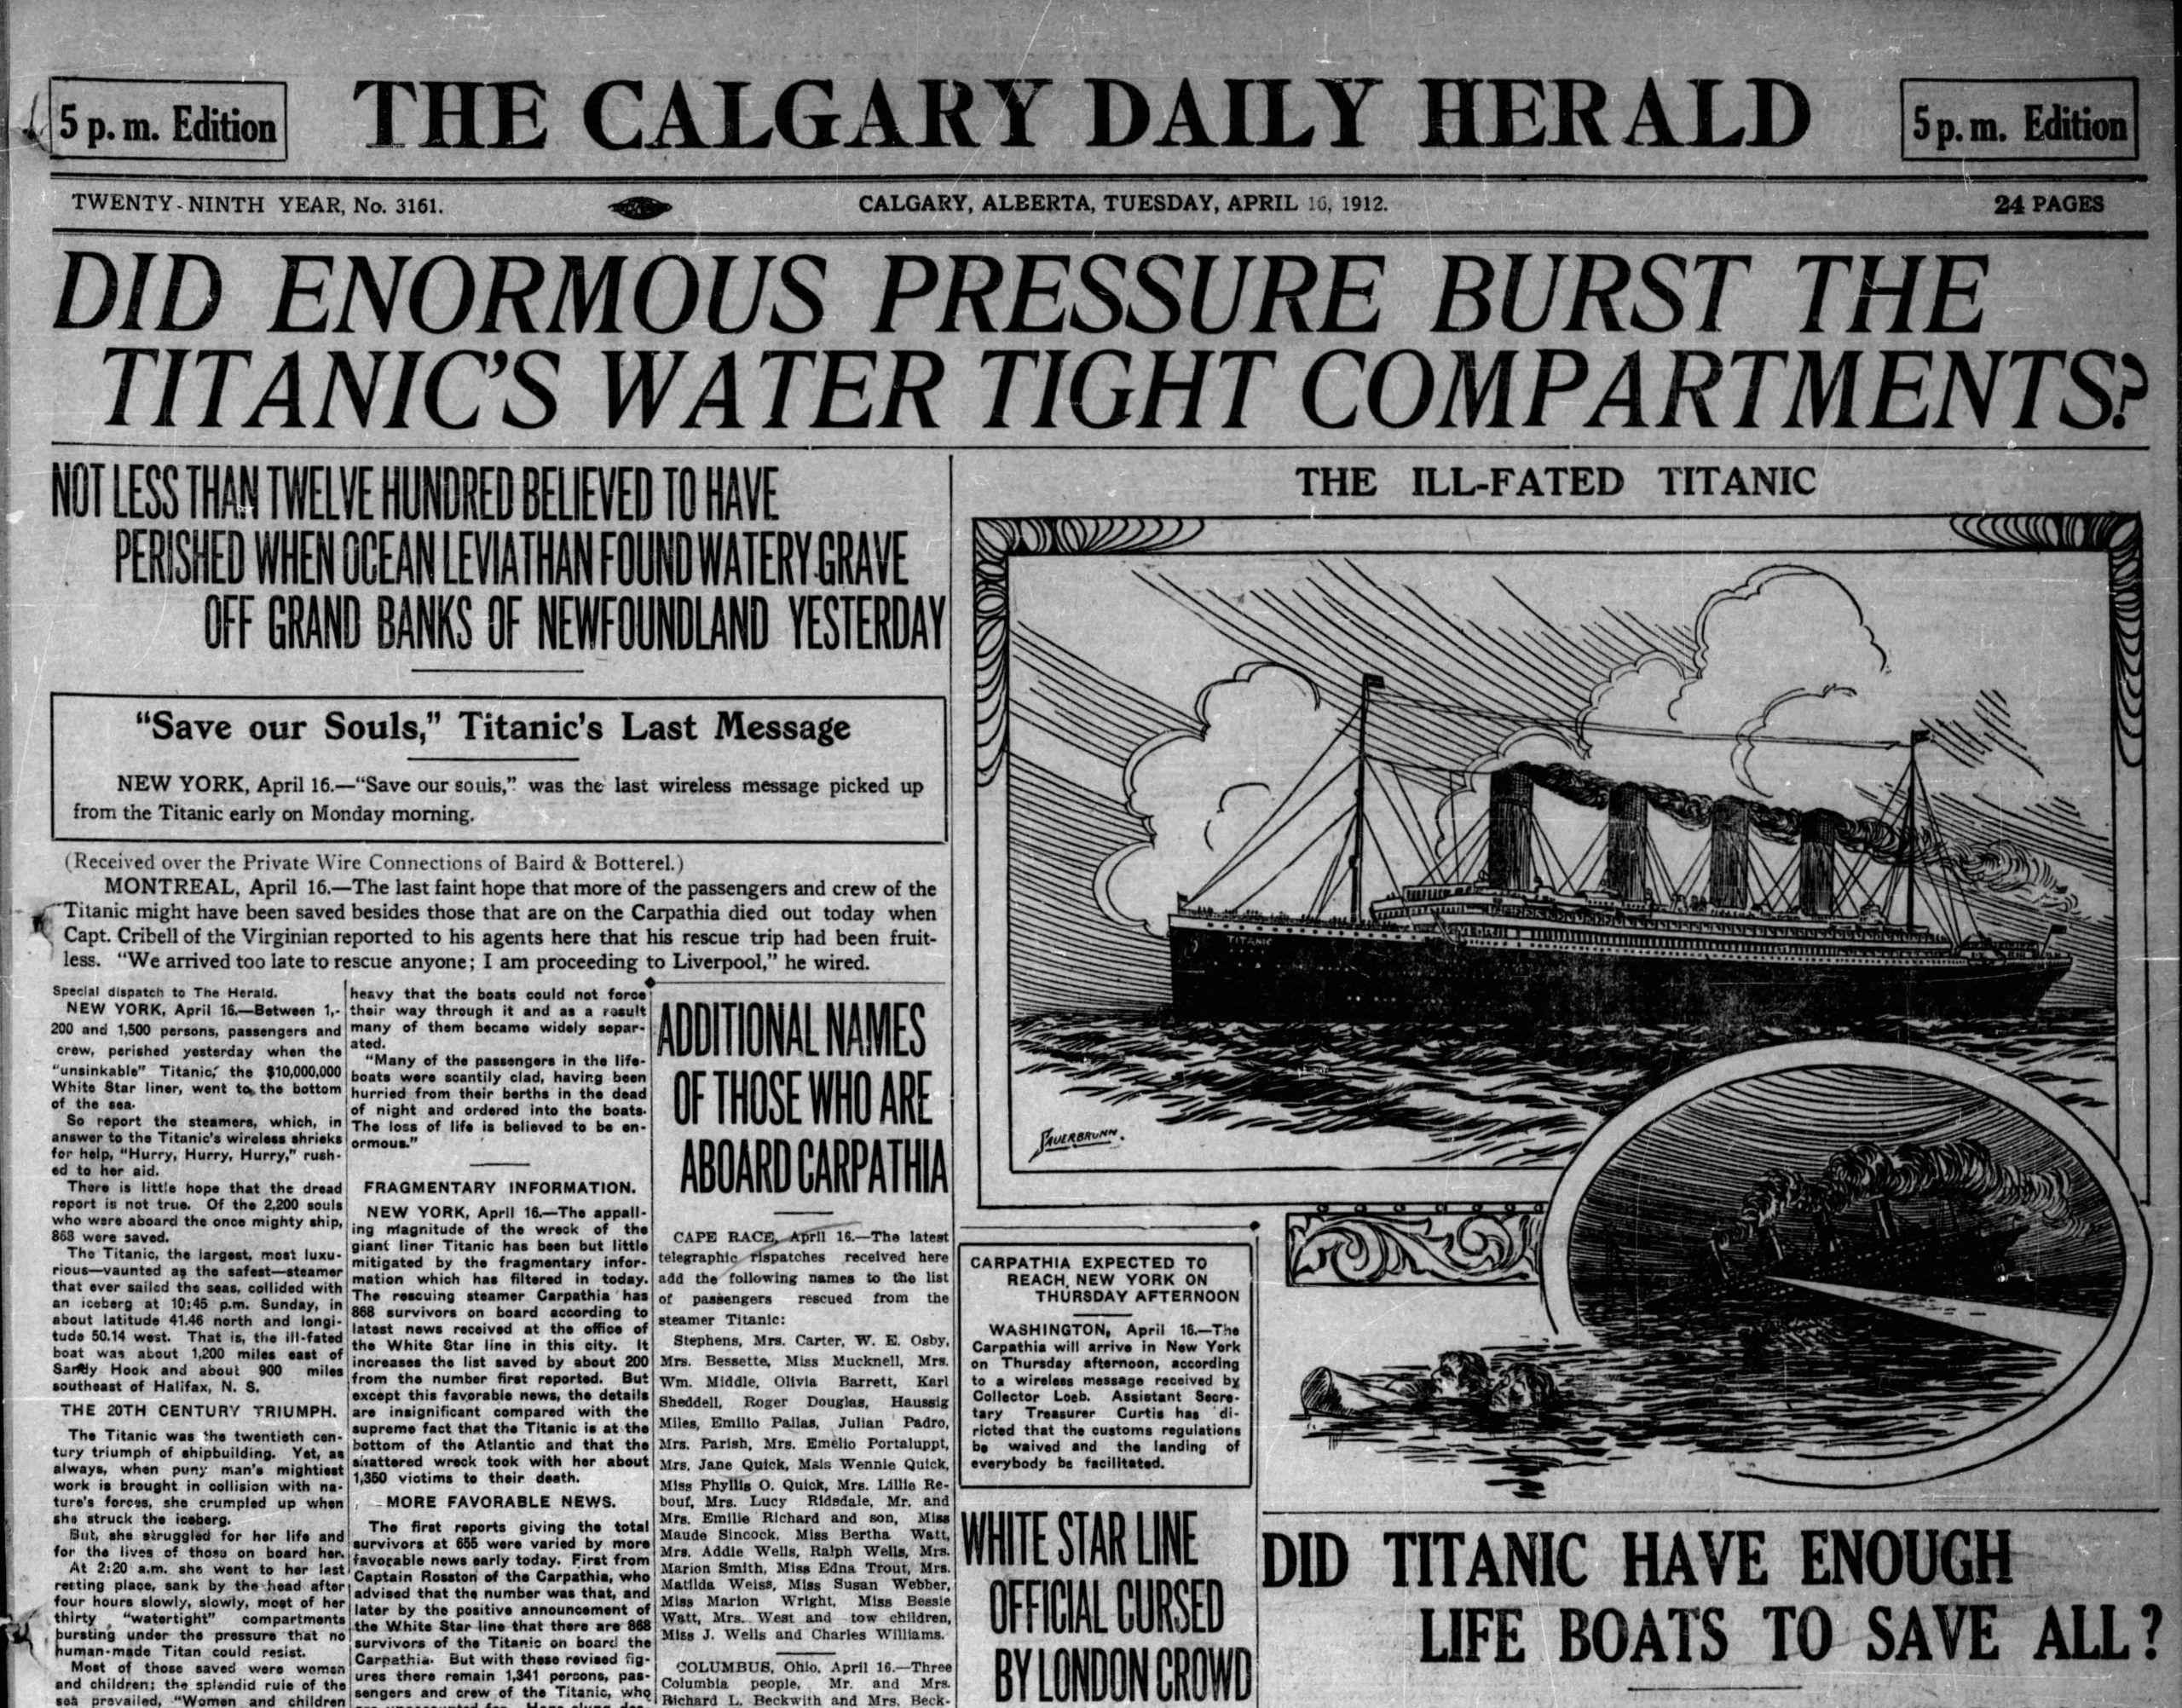 The sinking of the Titanic: 111 years ago today | Calgary Herald